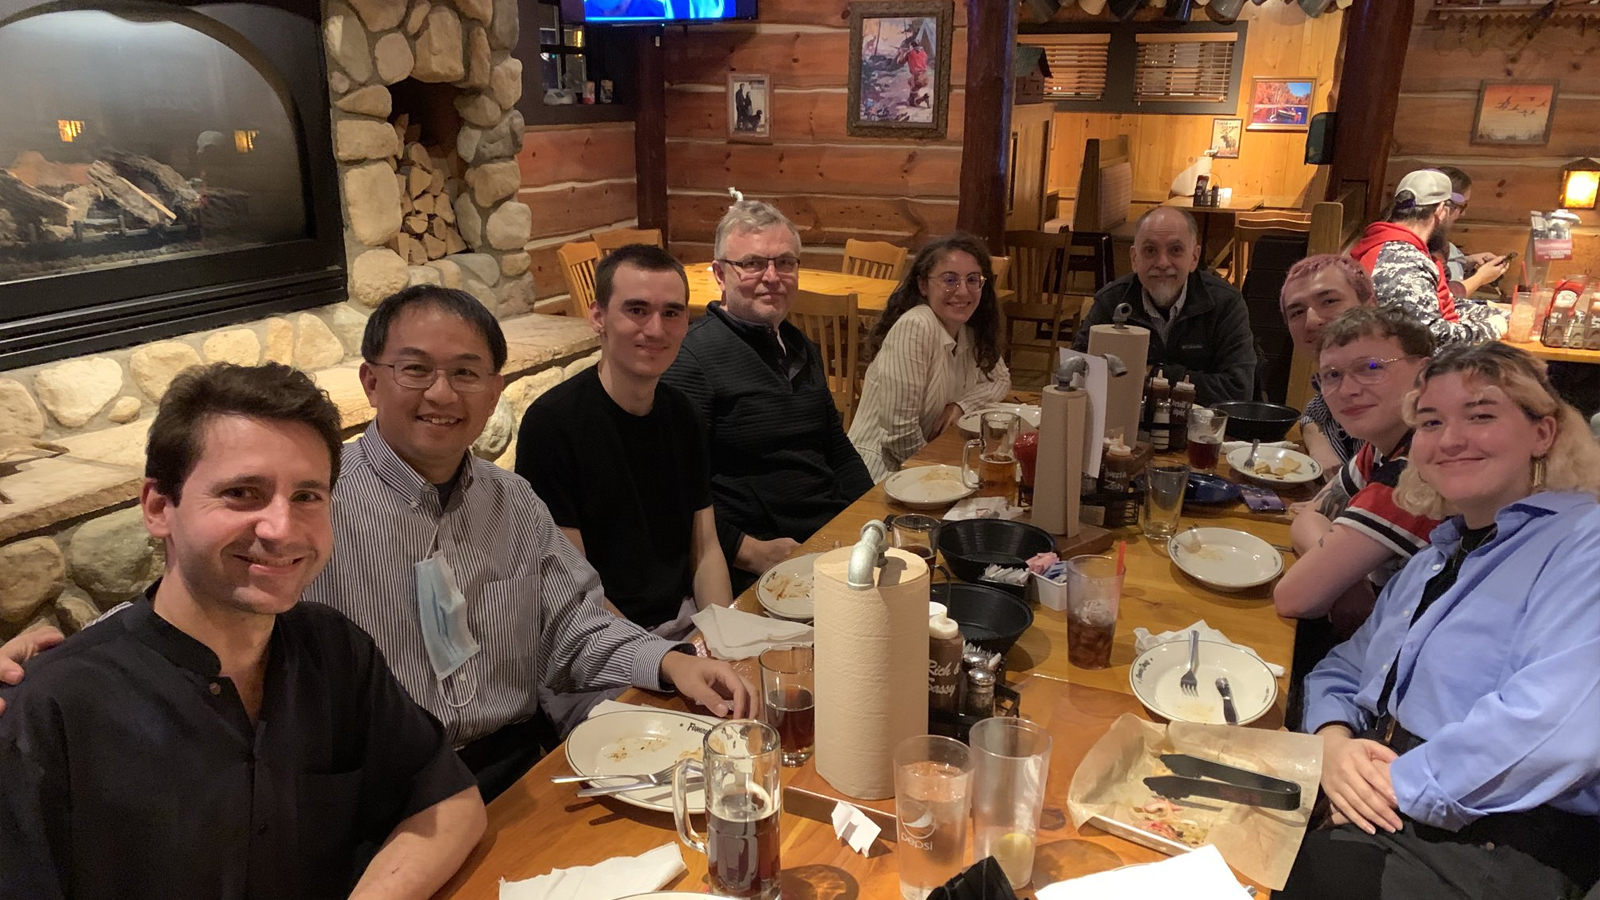 Faculty and students celebrating with dinner in a local restaurant